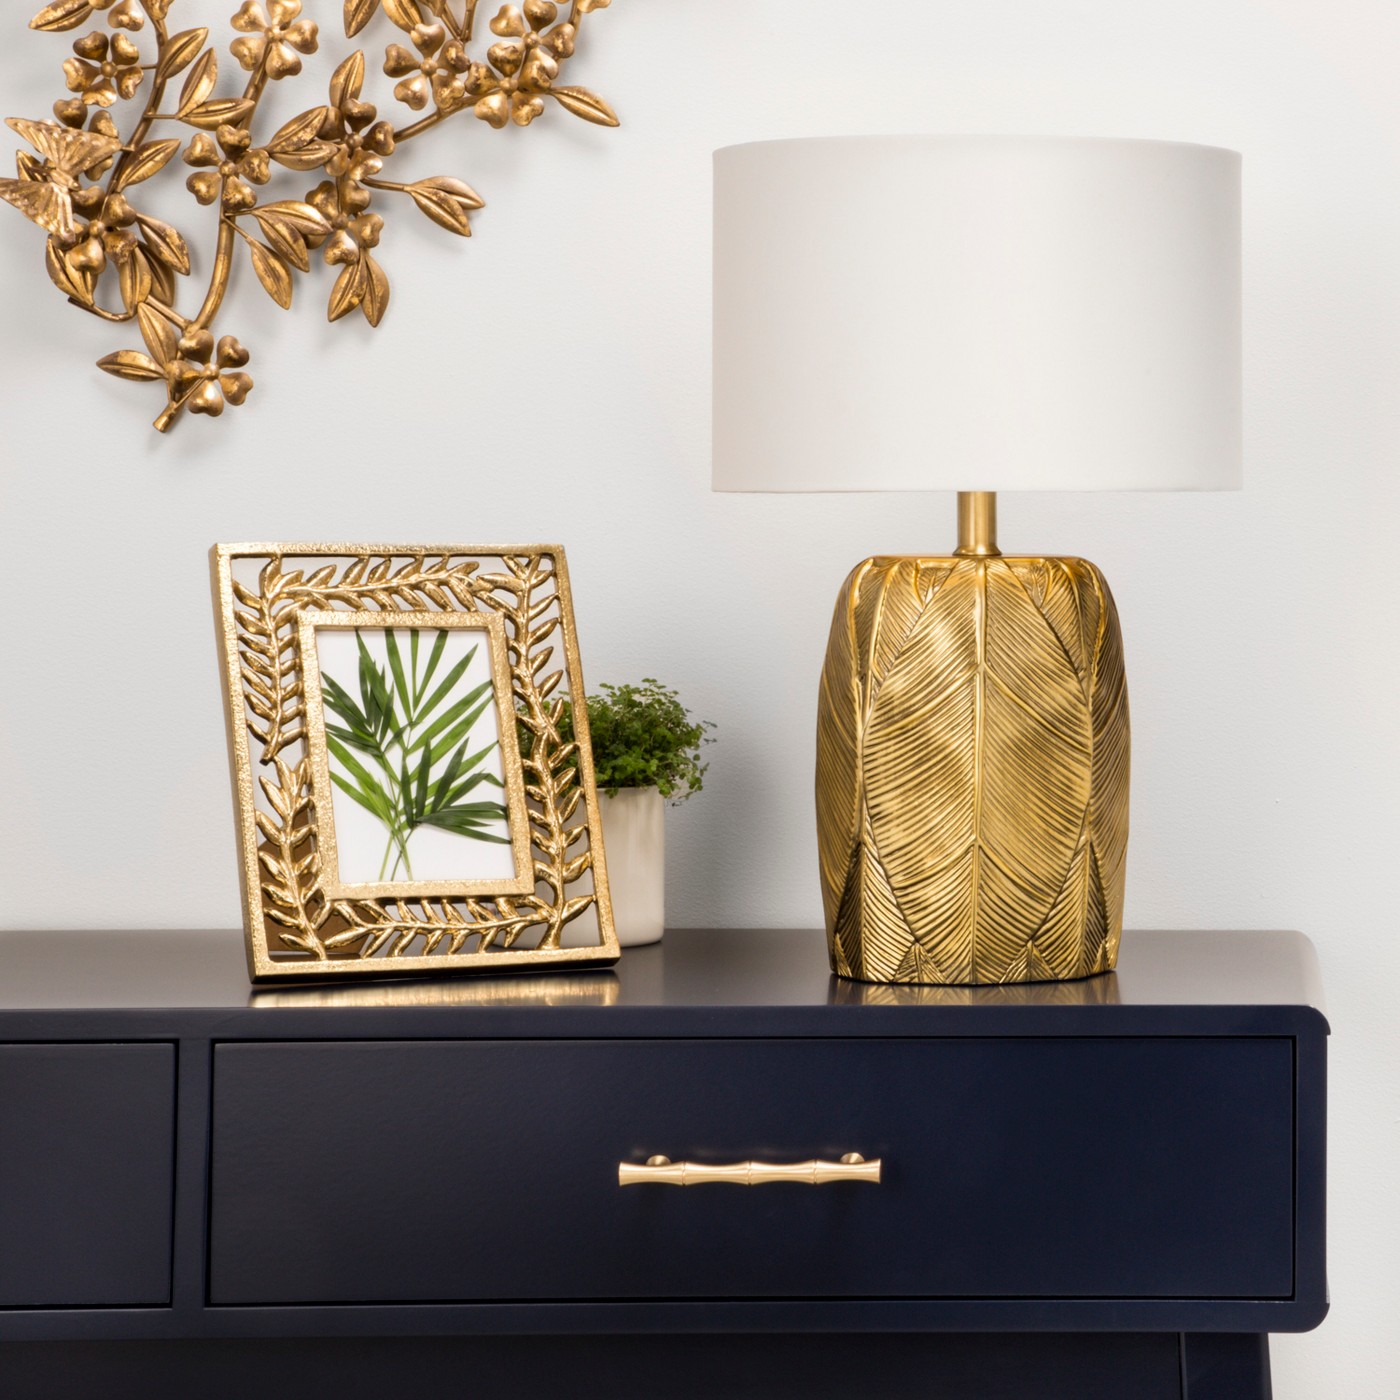 Decor Items You Need From Target